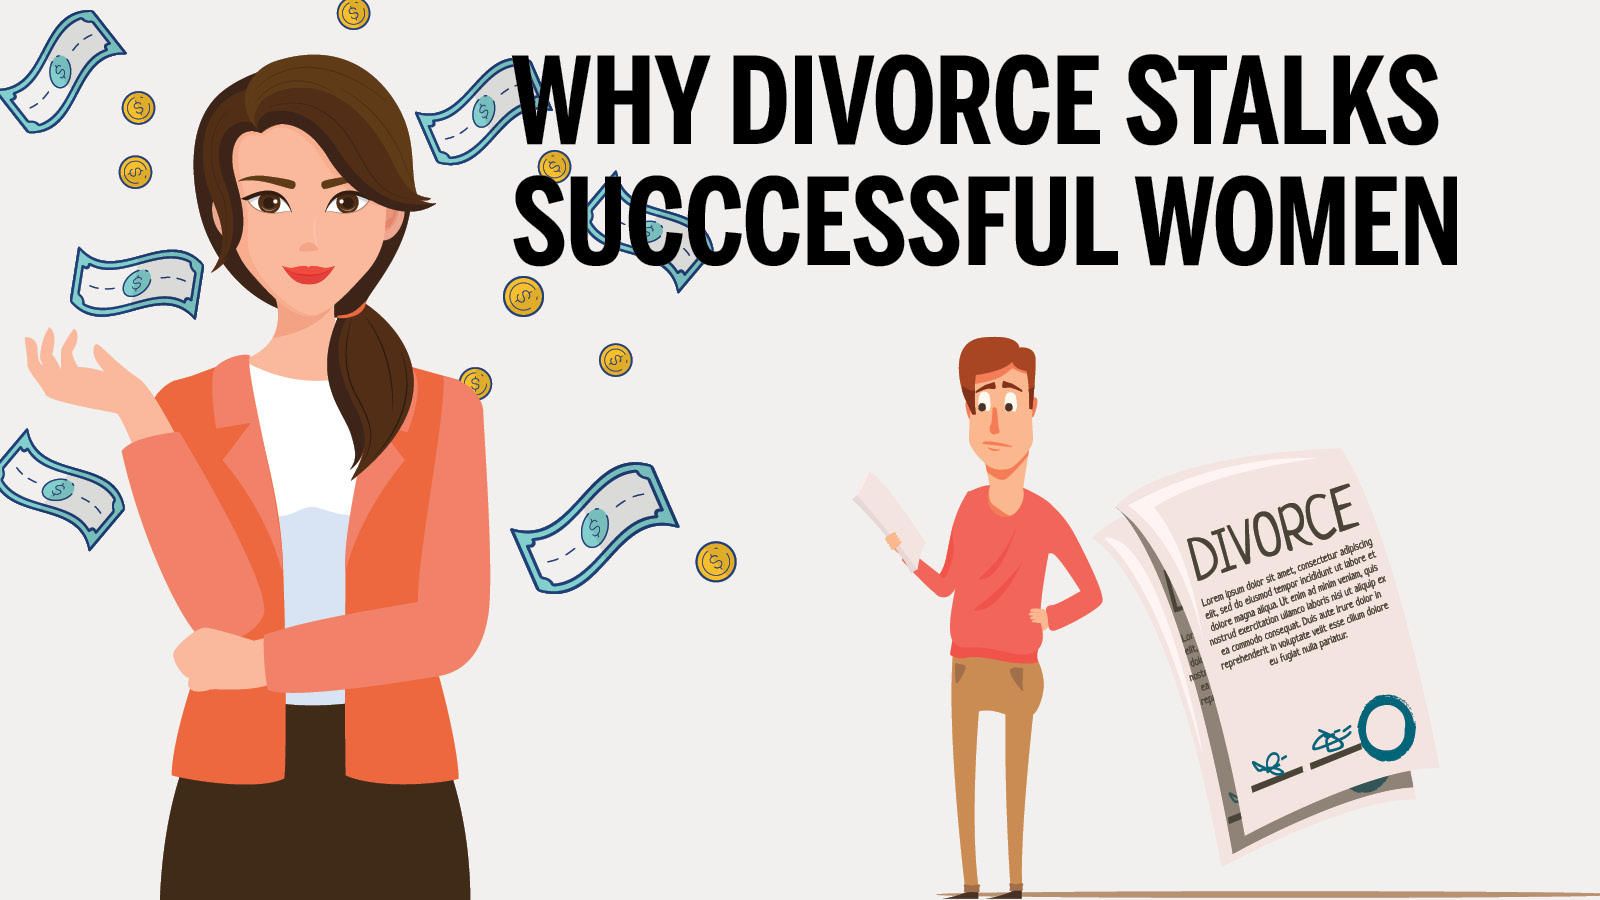 Why divorce stalks successful women of India